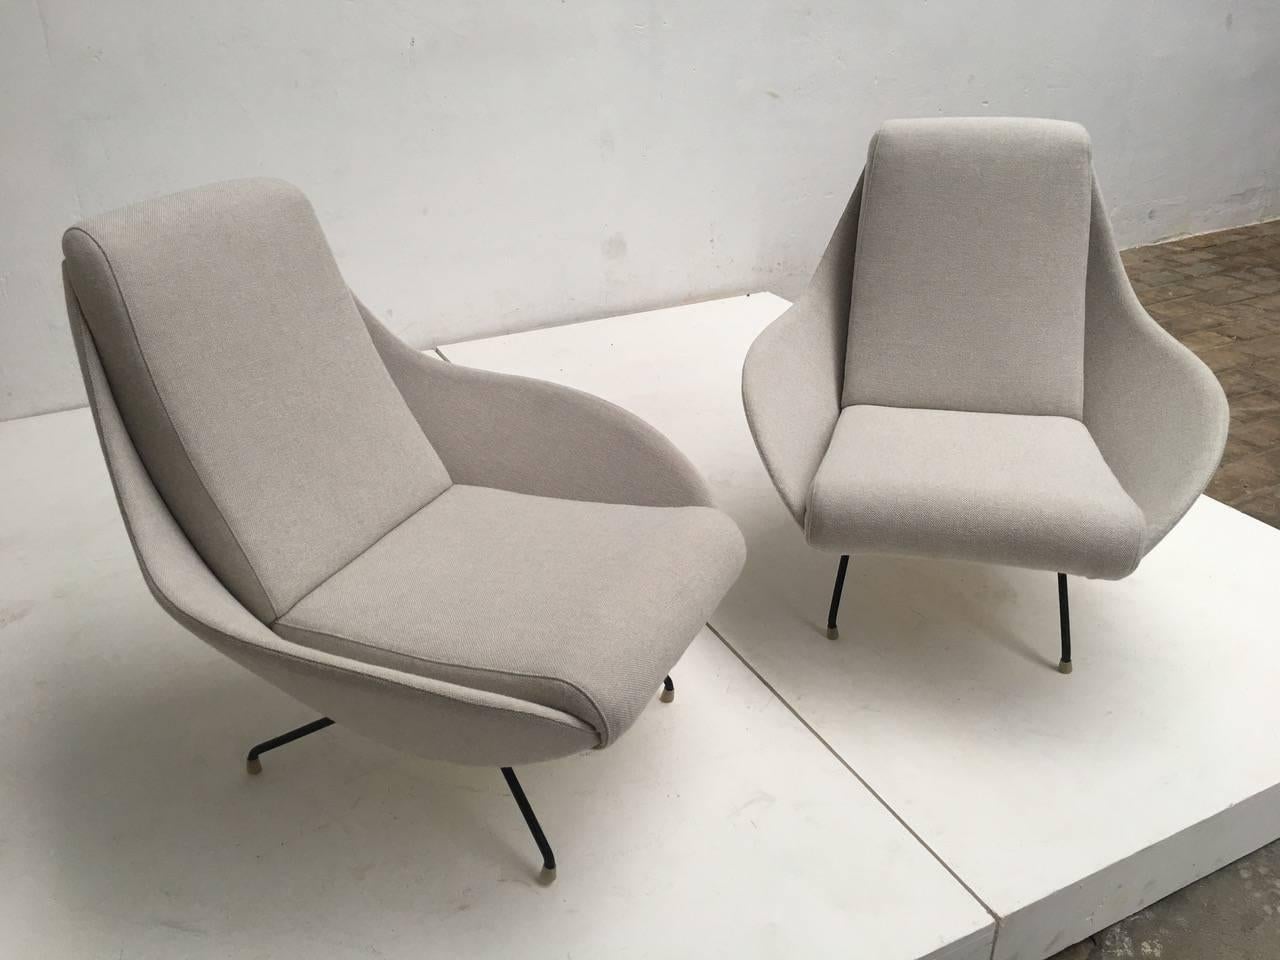 Pair of exquisite sculptural form Italian lounge chairs from the early-mid-1950s period featuring dramatic flowing eliptical 'mantis' form wings with a subtle sculptural double curvature which envelope you and form an integral lateral and arm